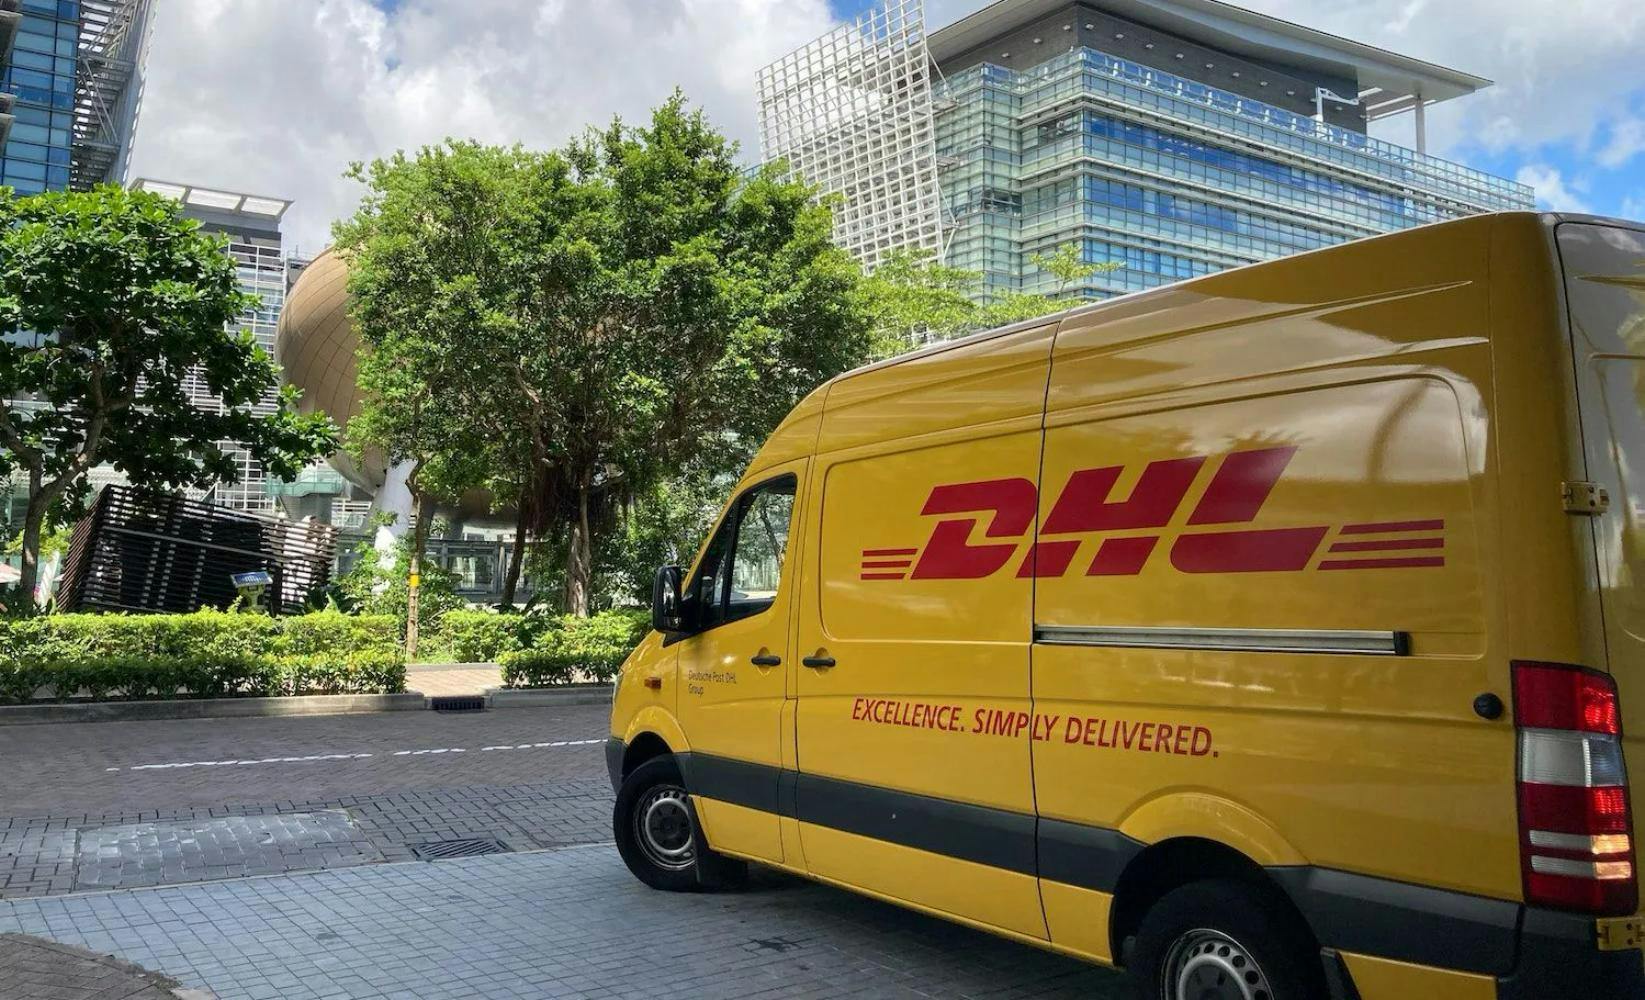 What is DHL “On Demand Delivery”